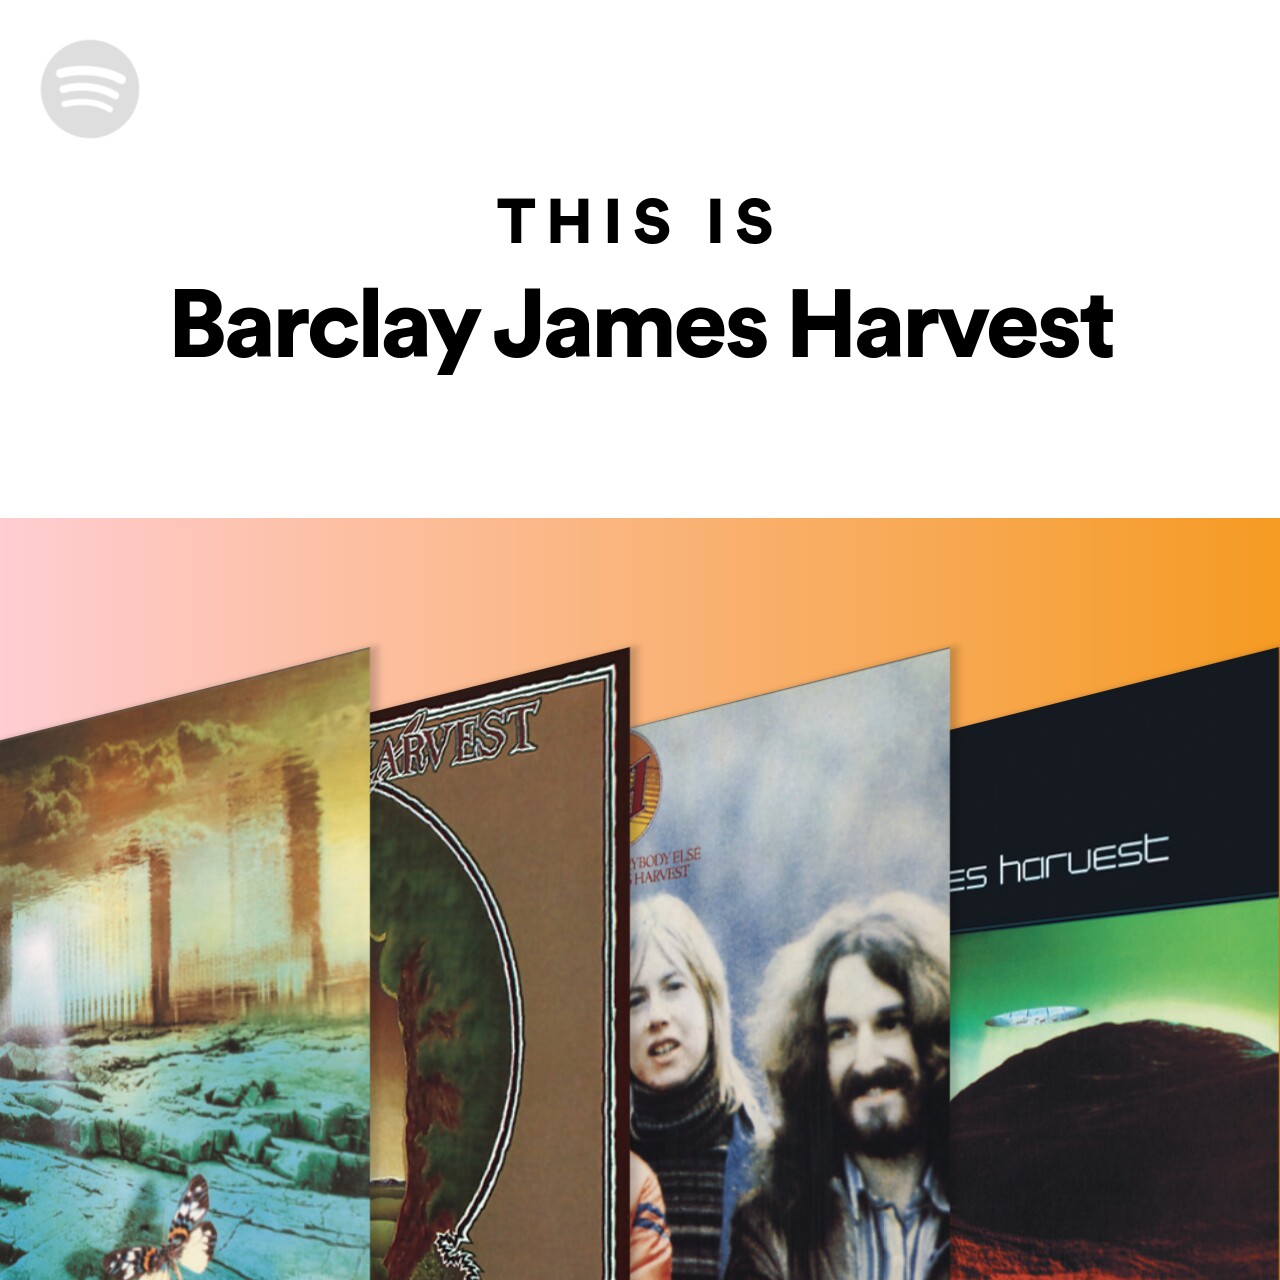 This Is Barclay James Harvest